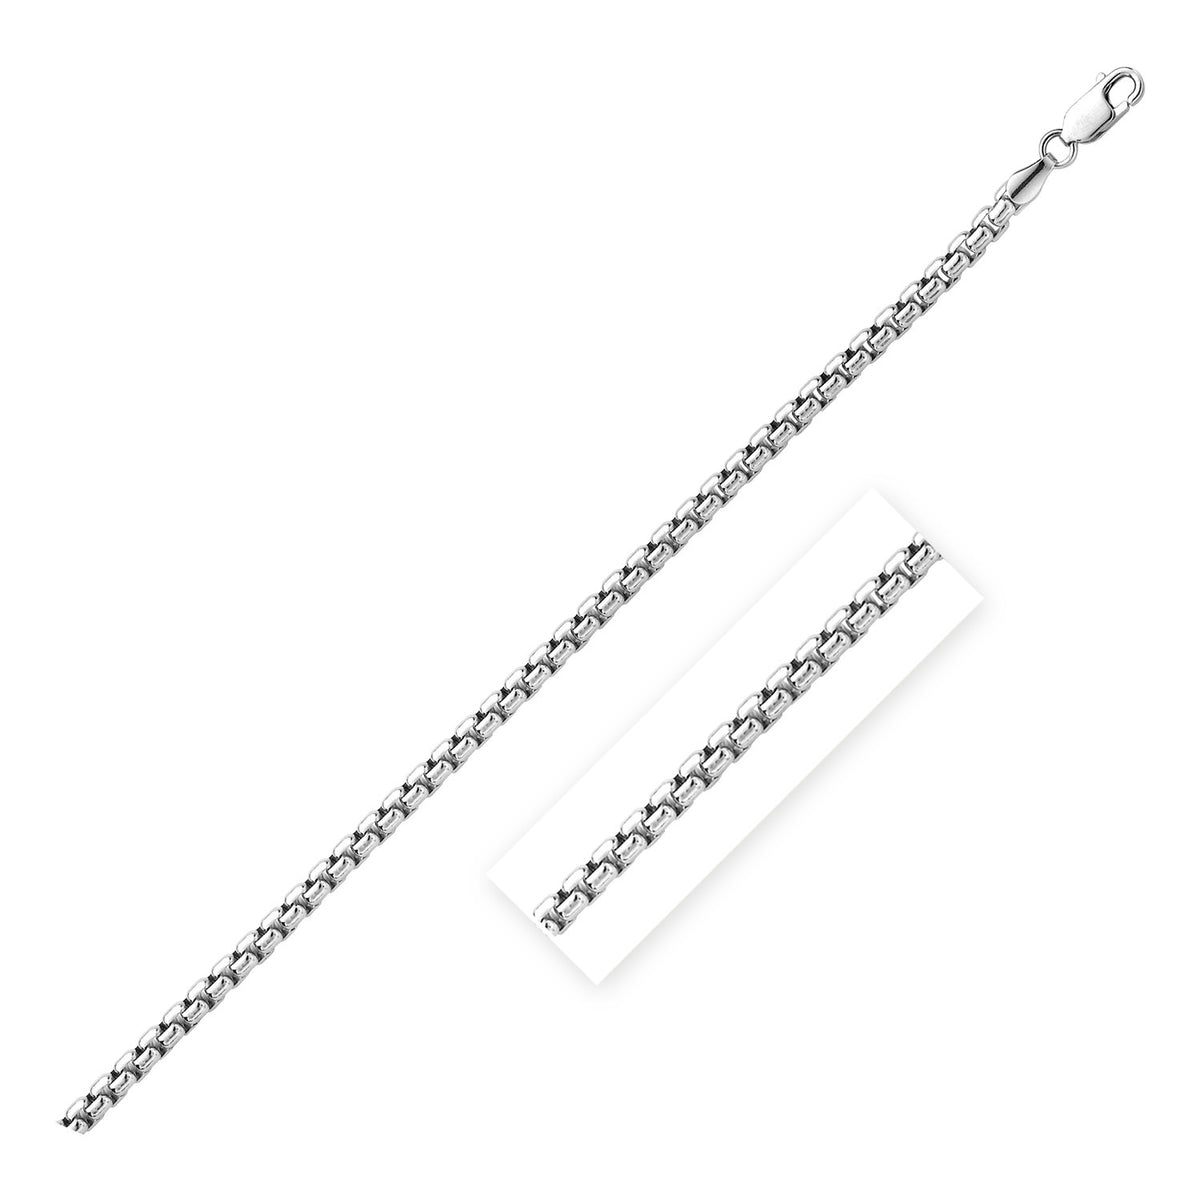 Round Box Chain - Sterling Silver 3.00mm